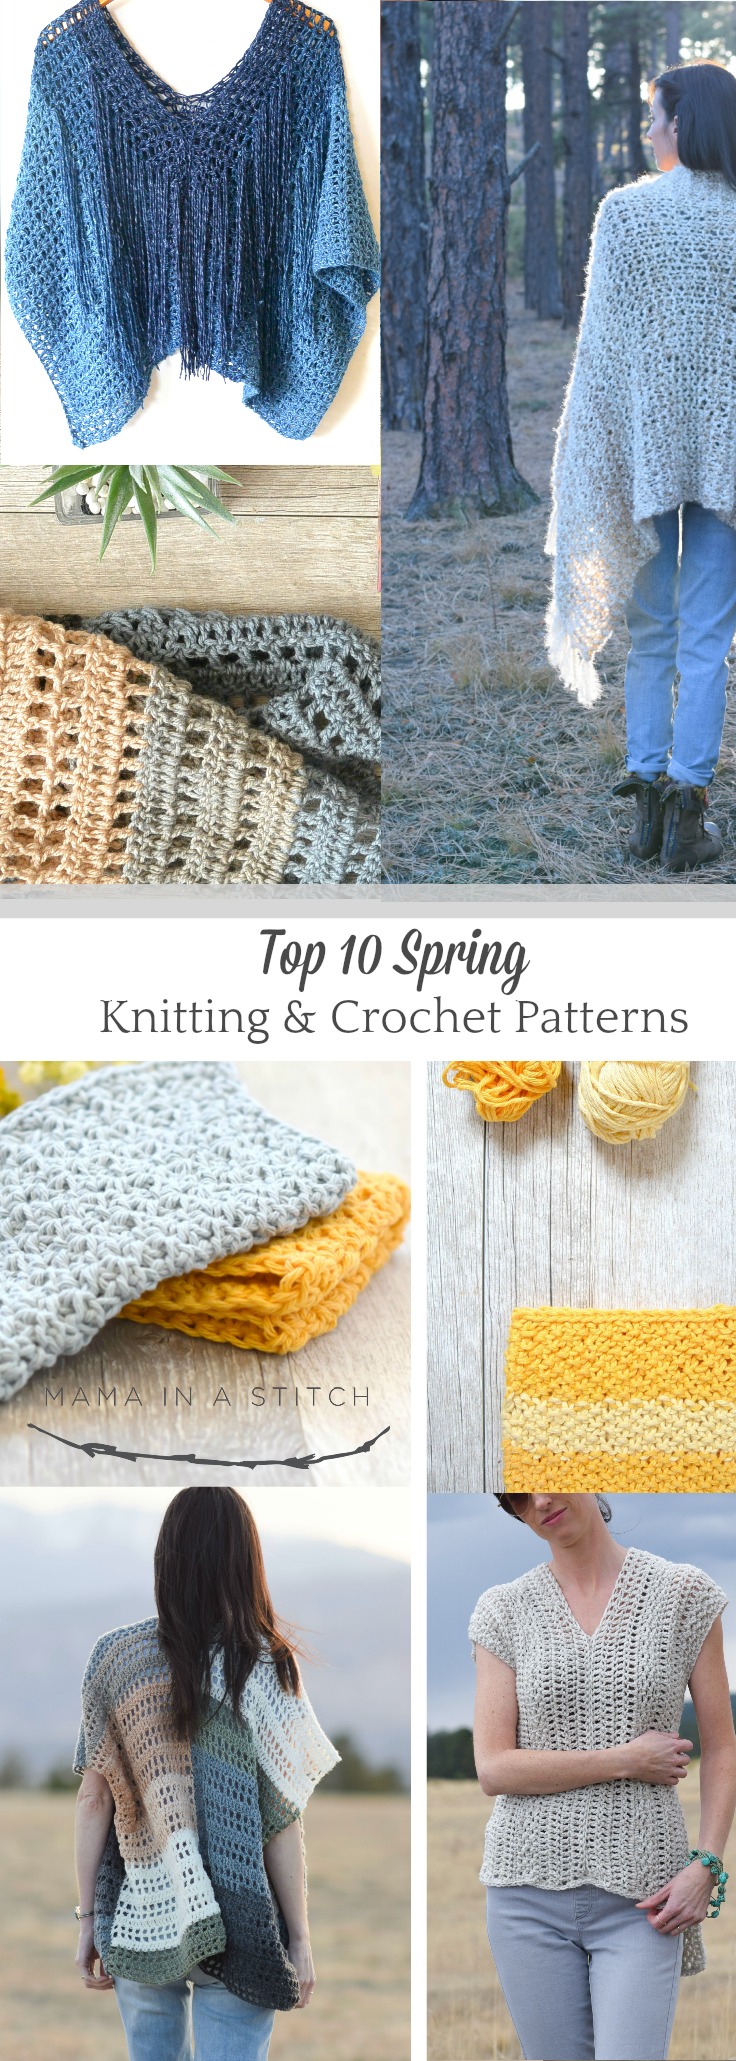 Knitting & Crochet – Knitting and Crochet patterns and projects